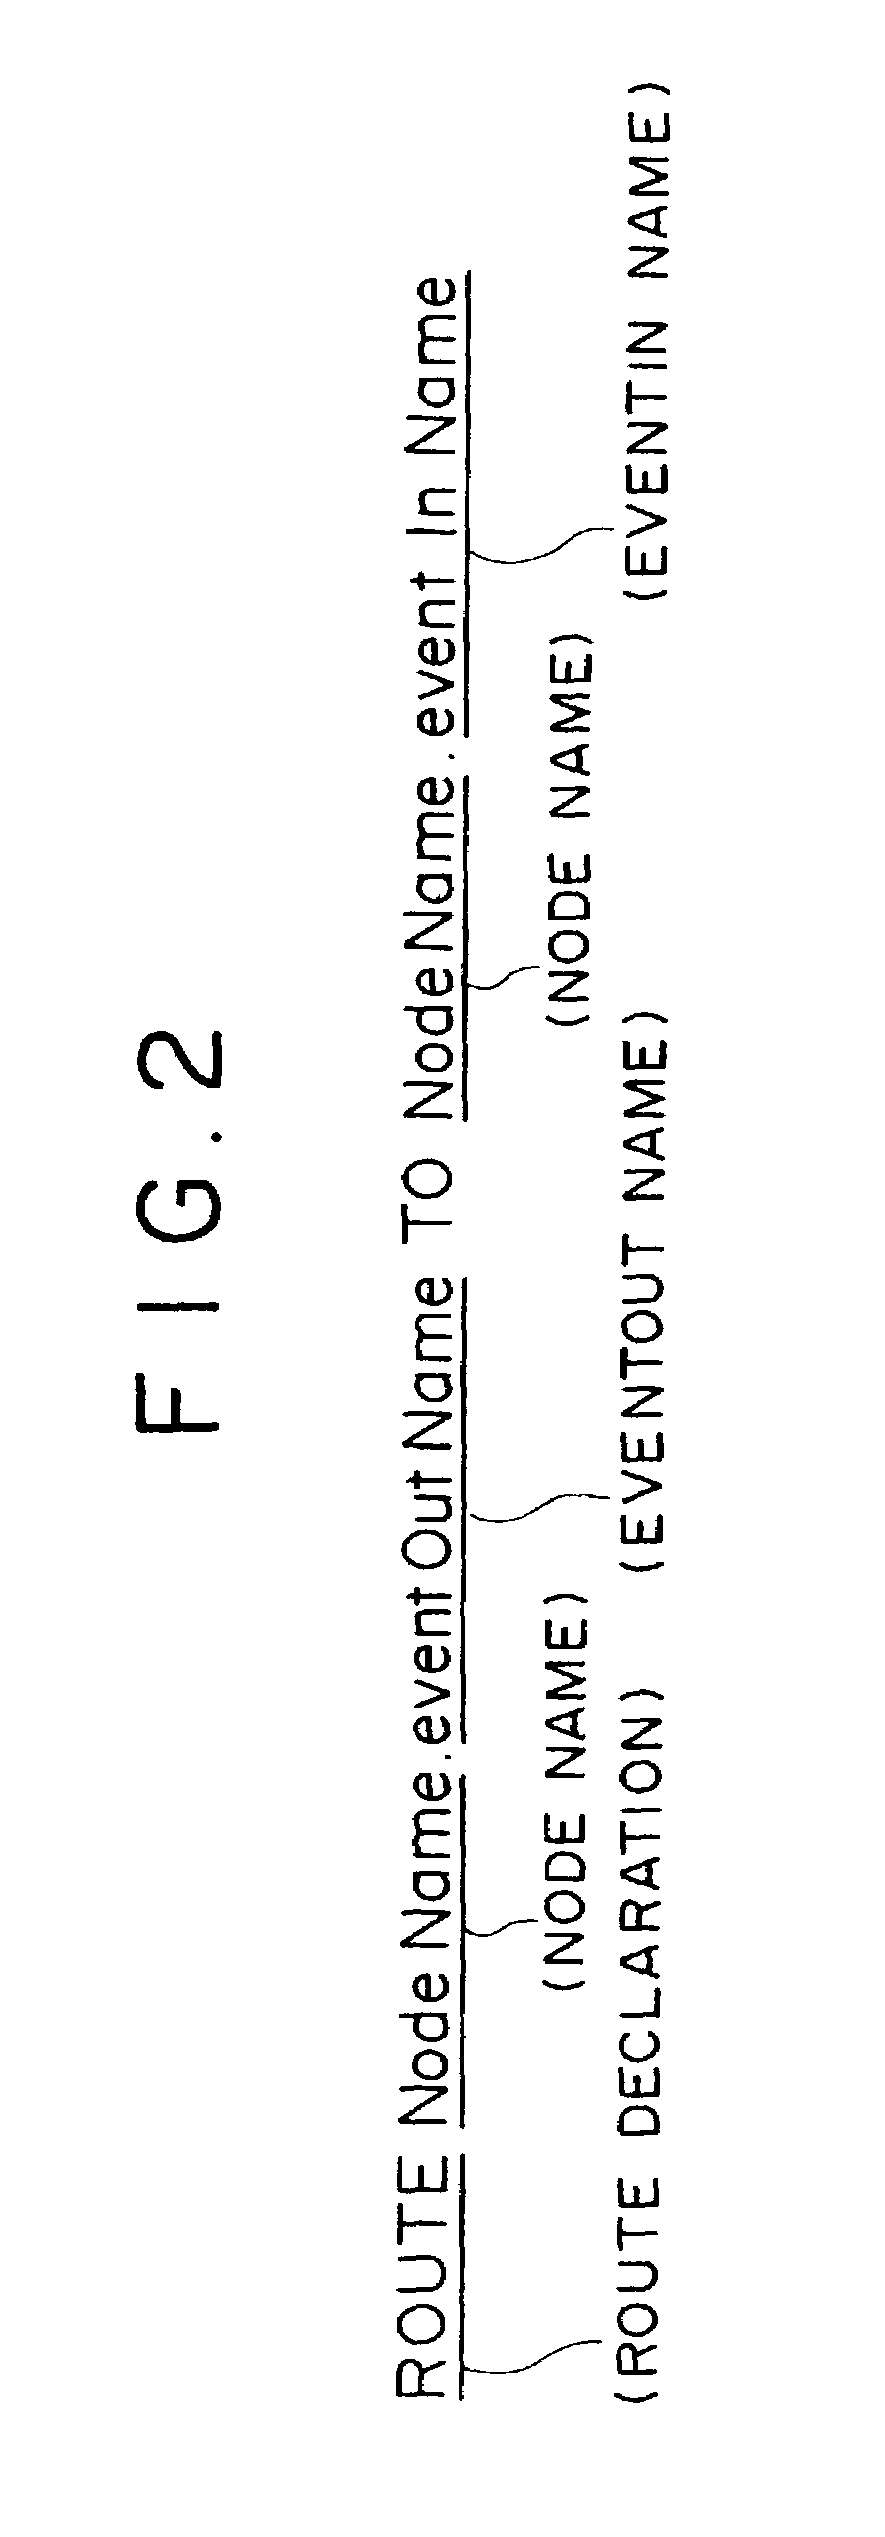 Information processing apparatus, method and medium using a virtual reality space